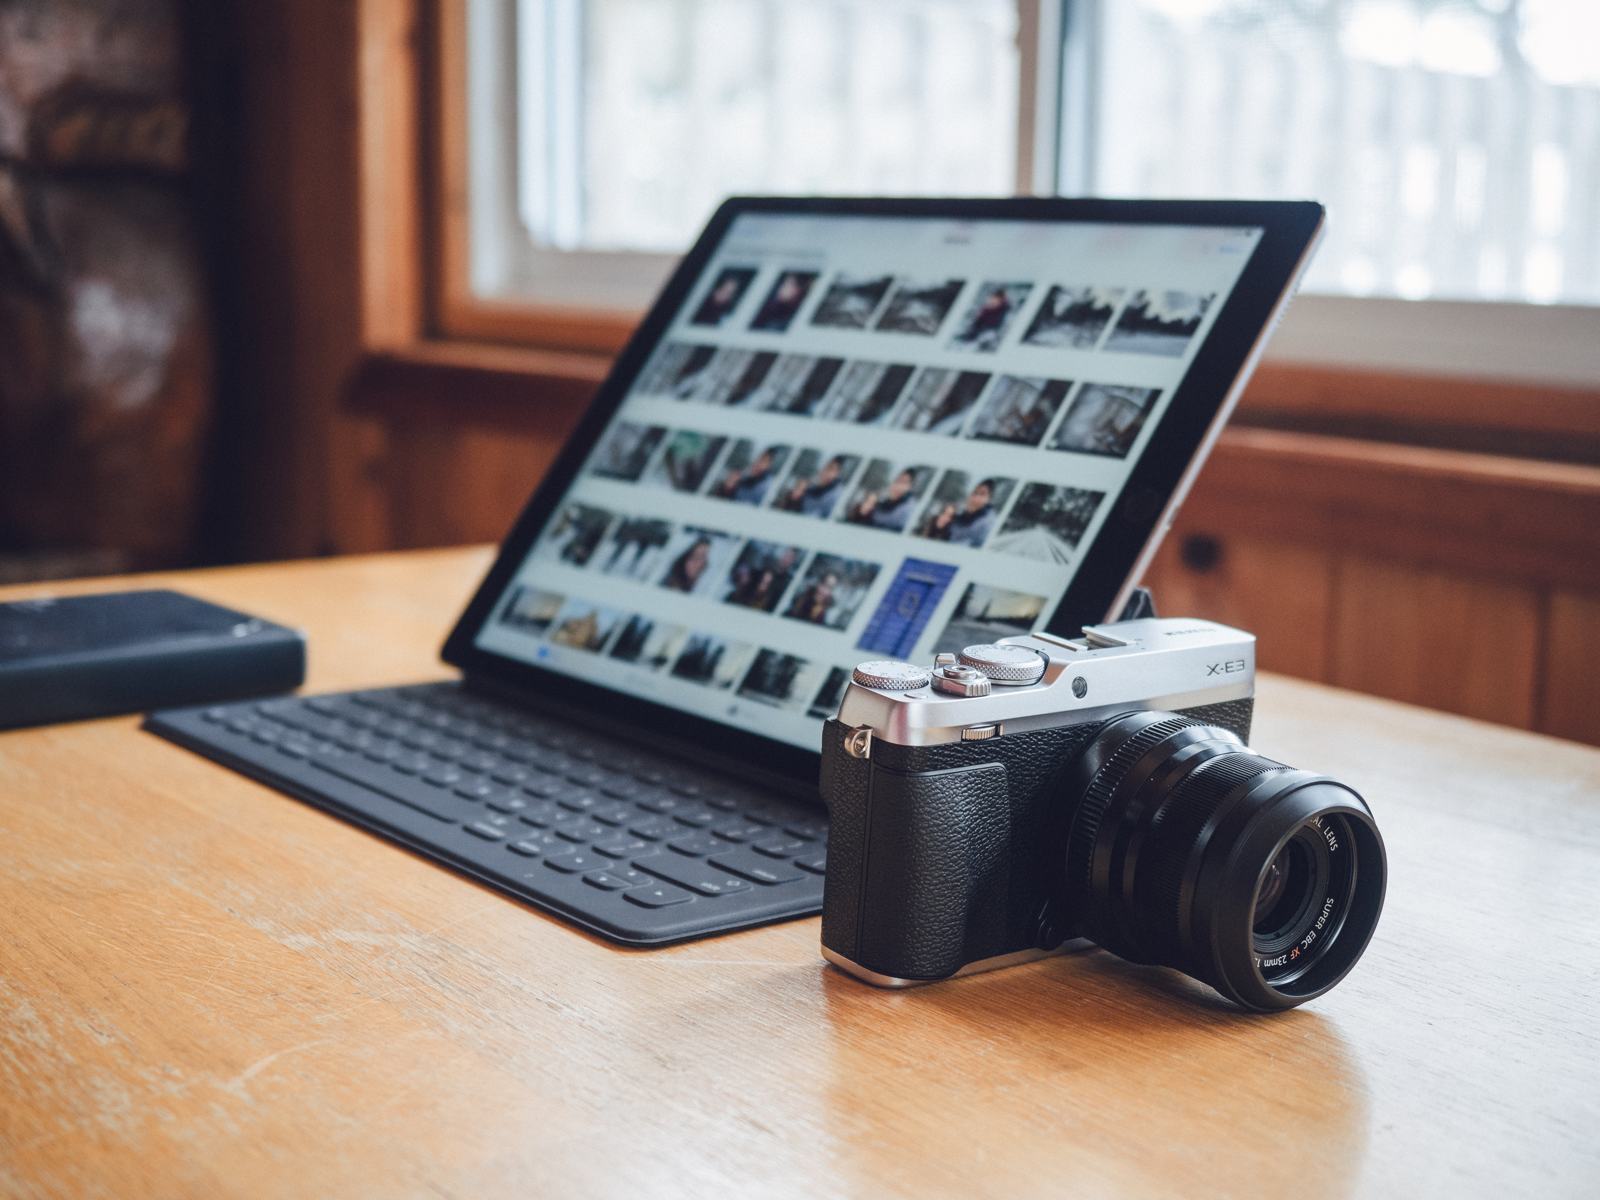 Using an iPad for photography workflows